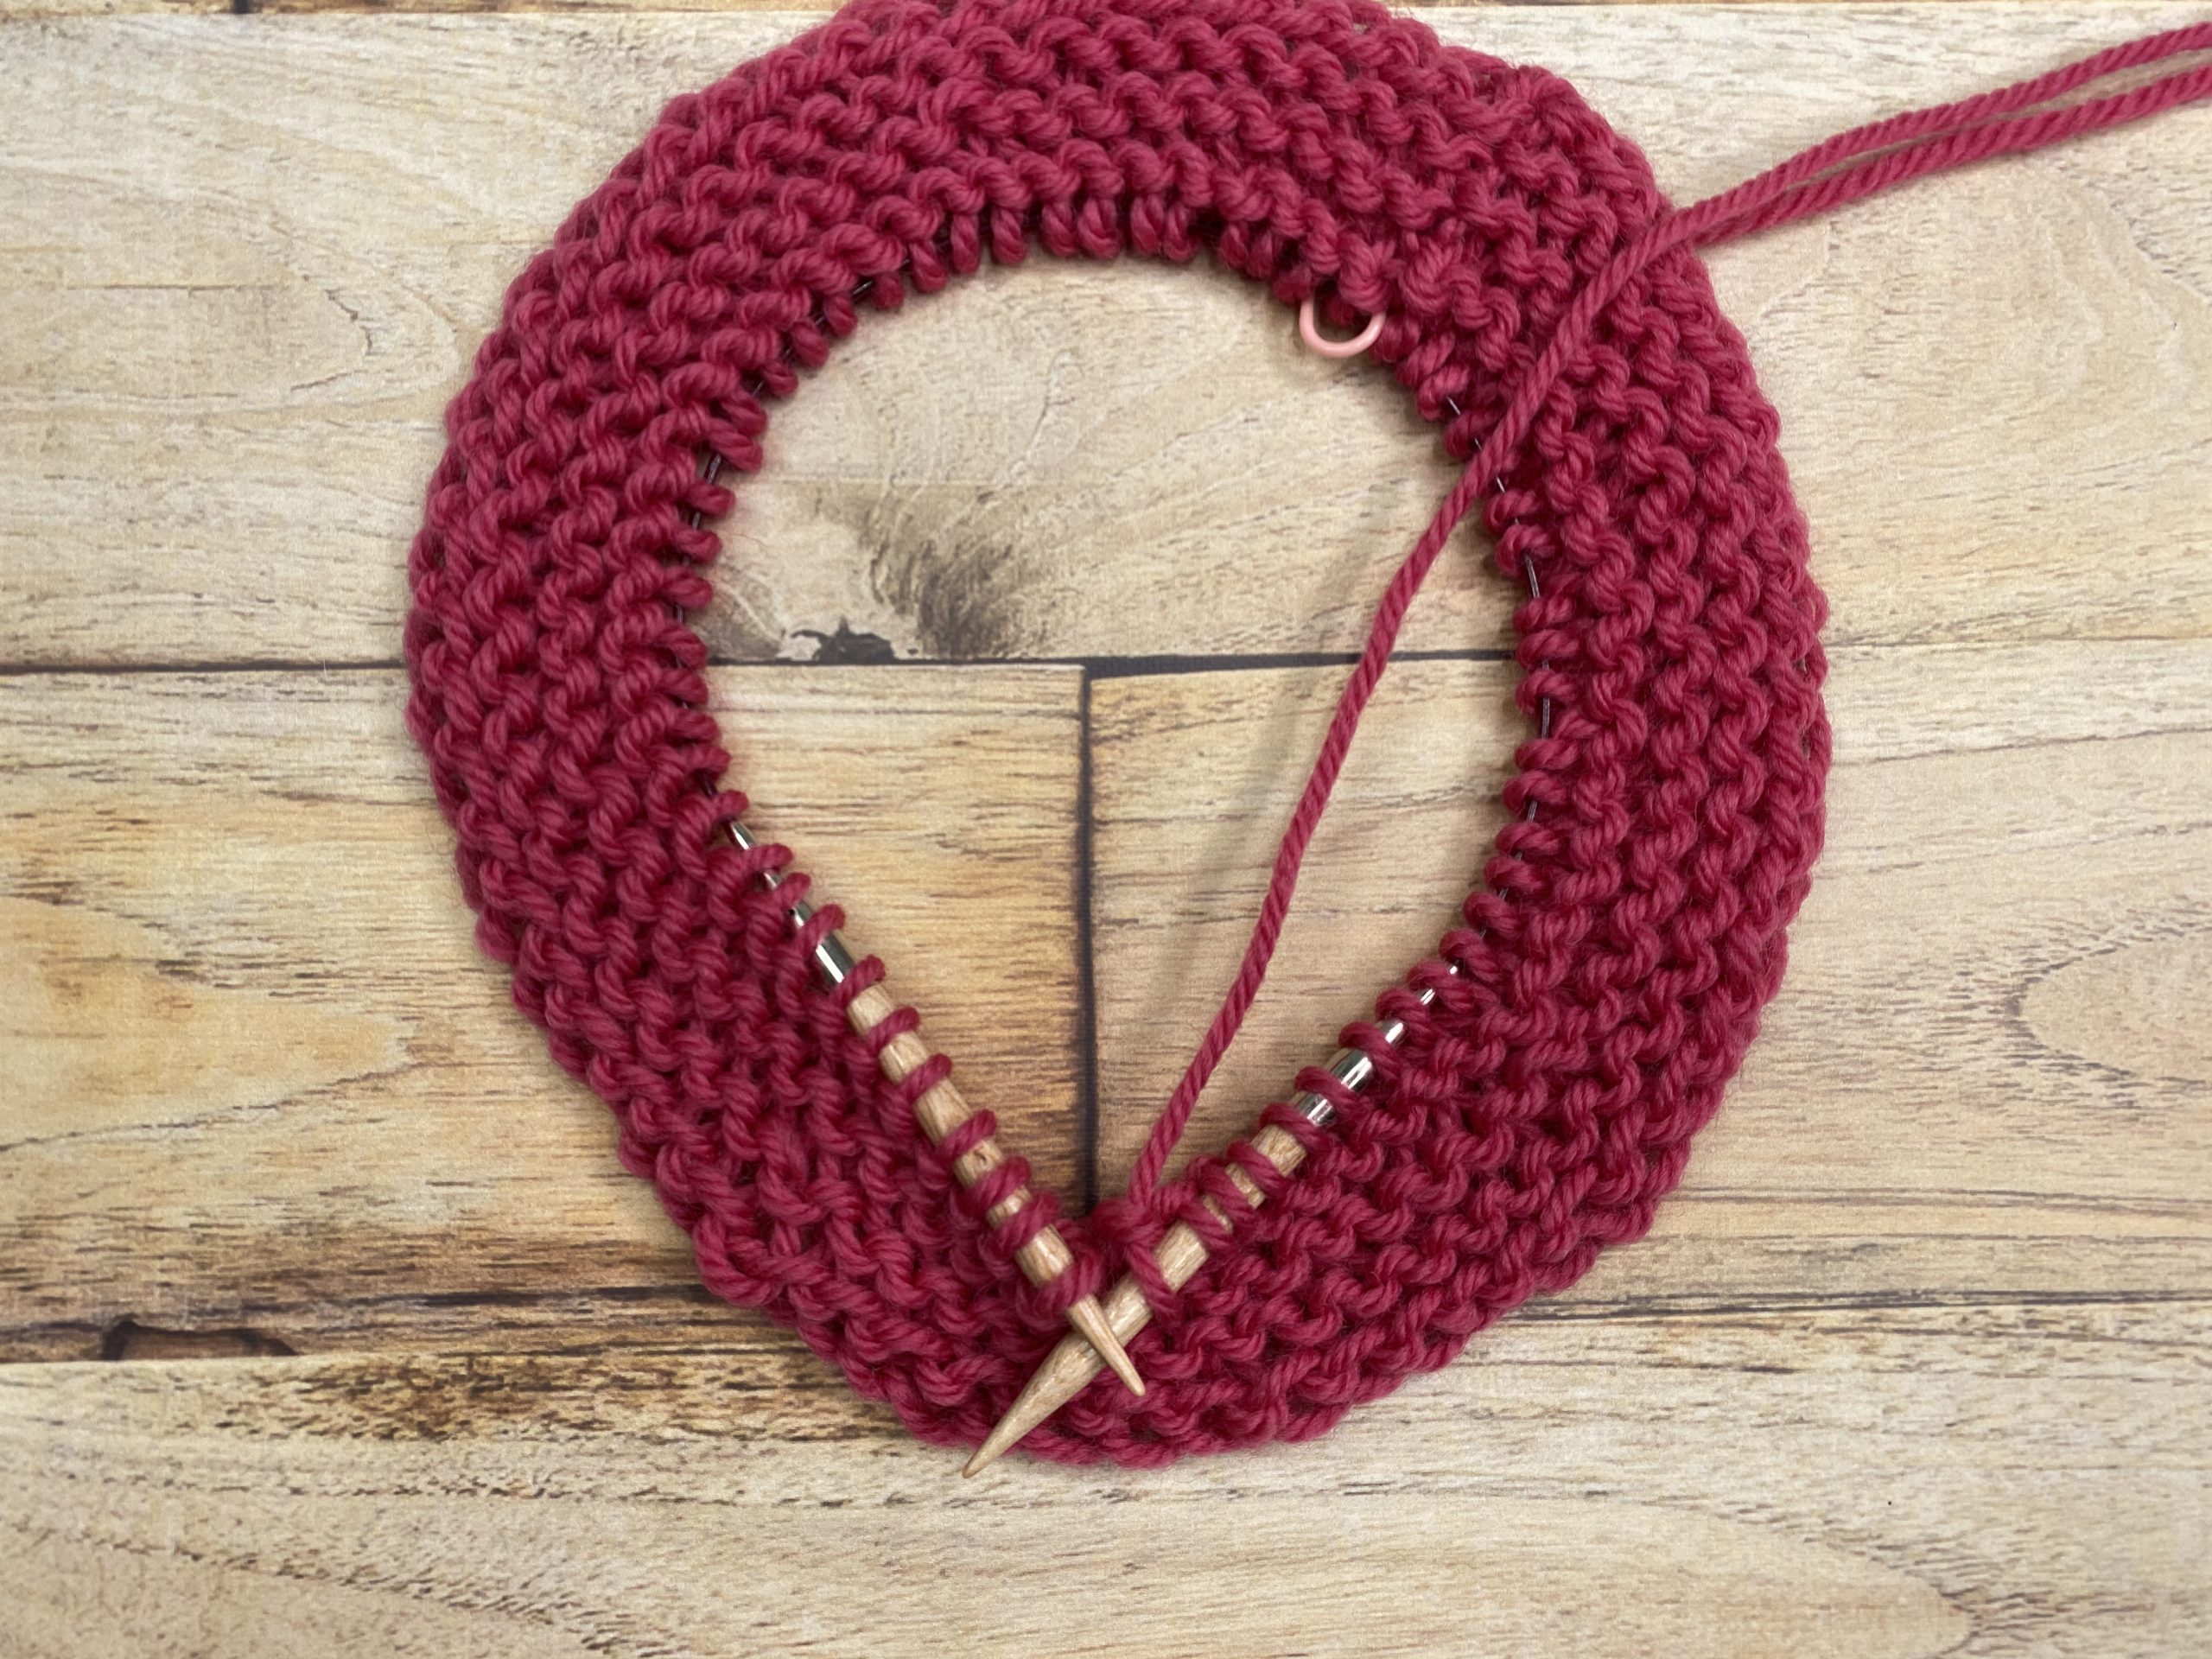 Why my knitting looks different knitting flat and in the round